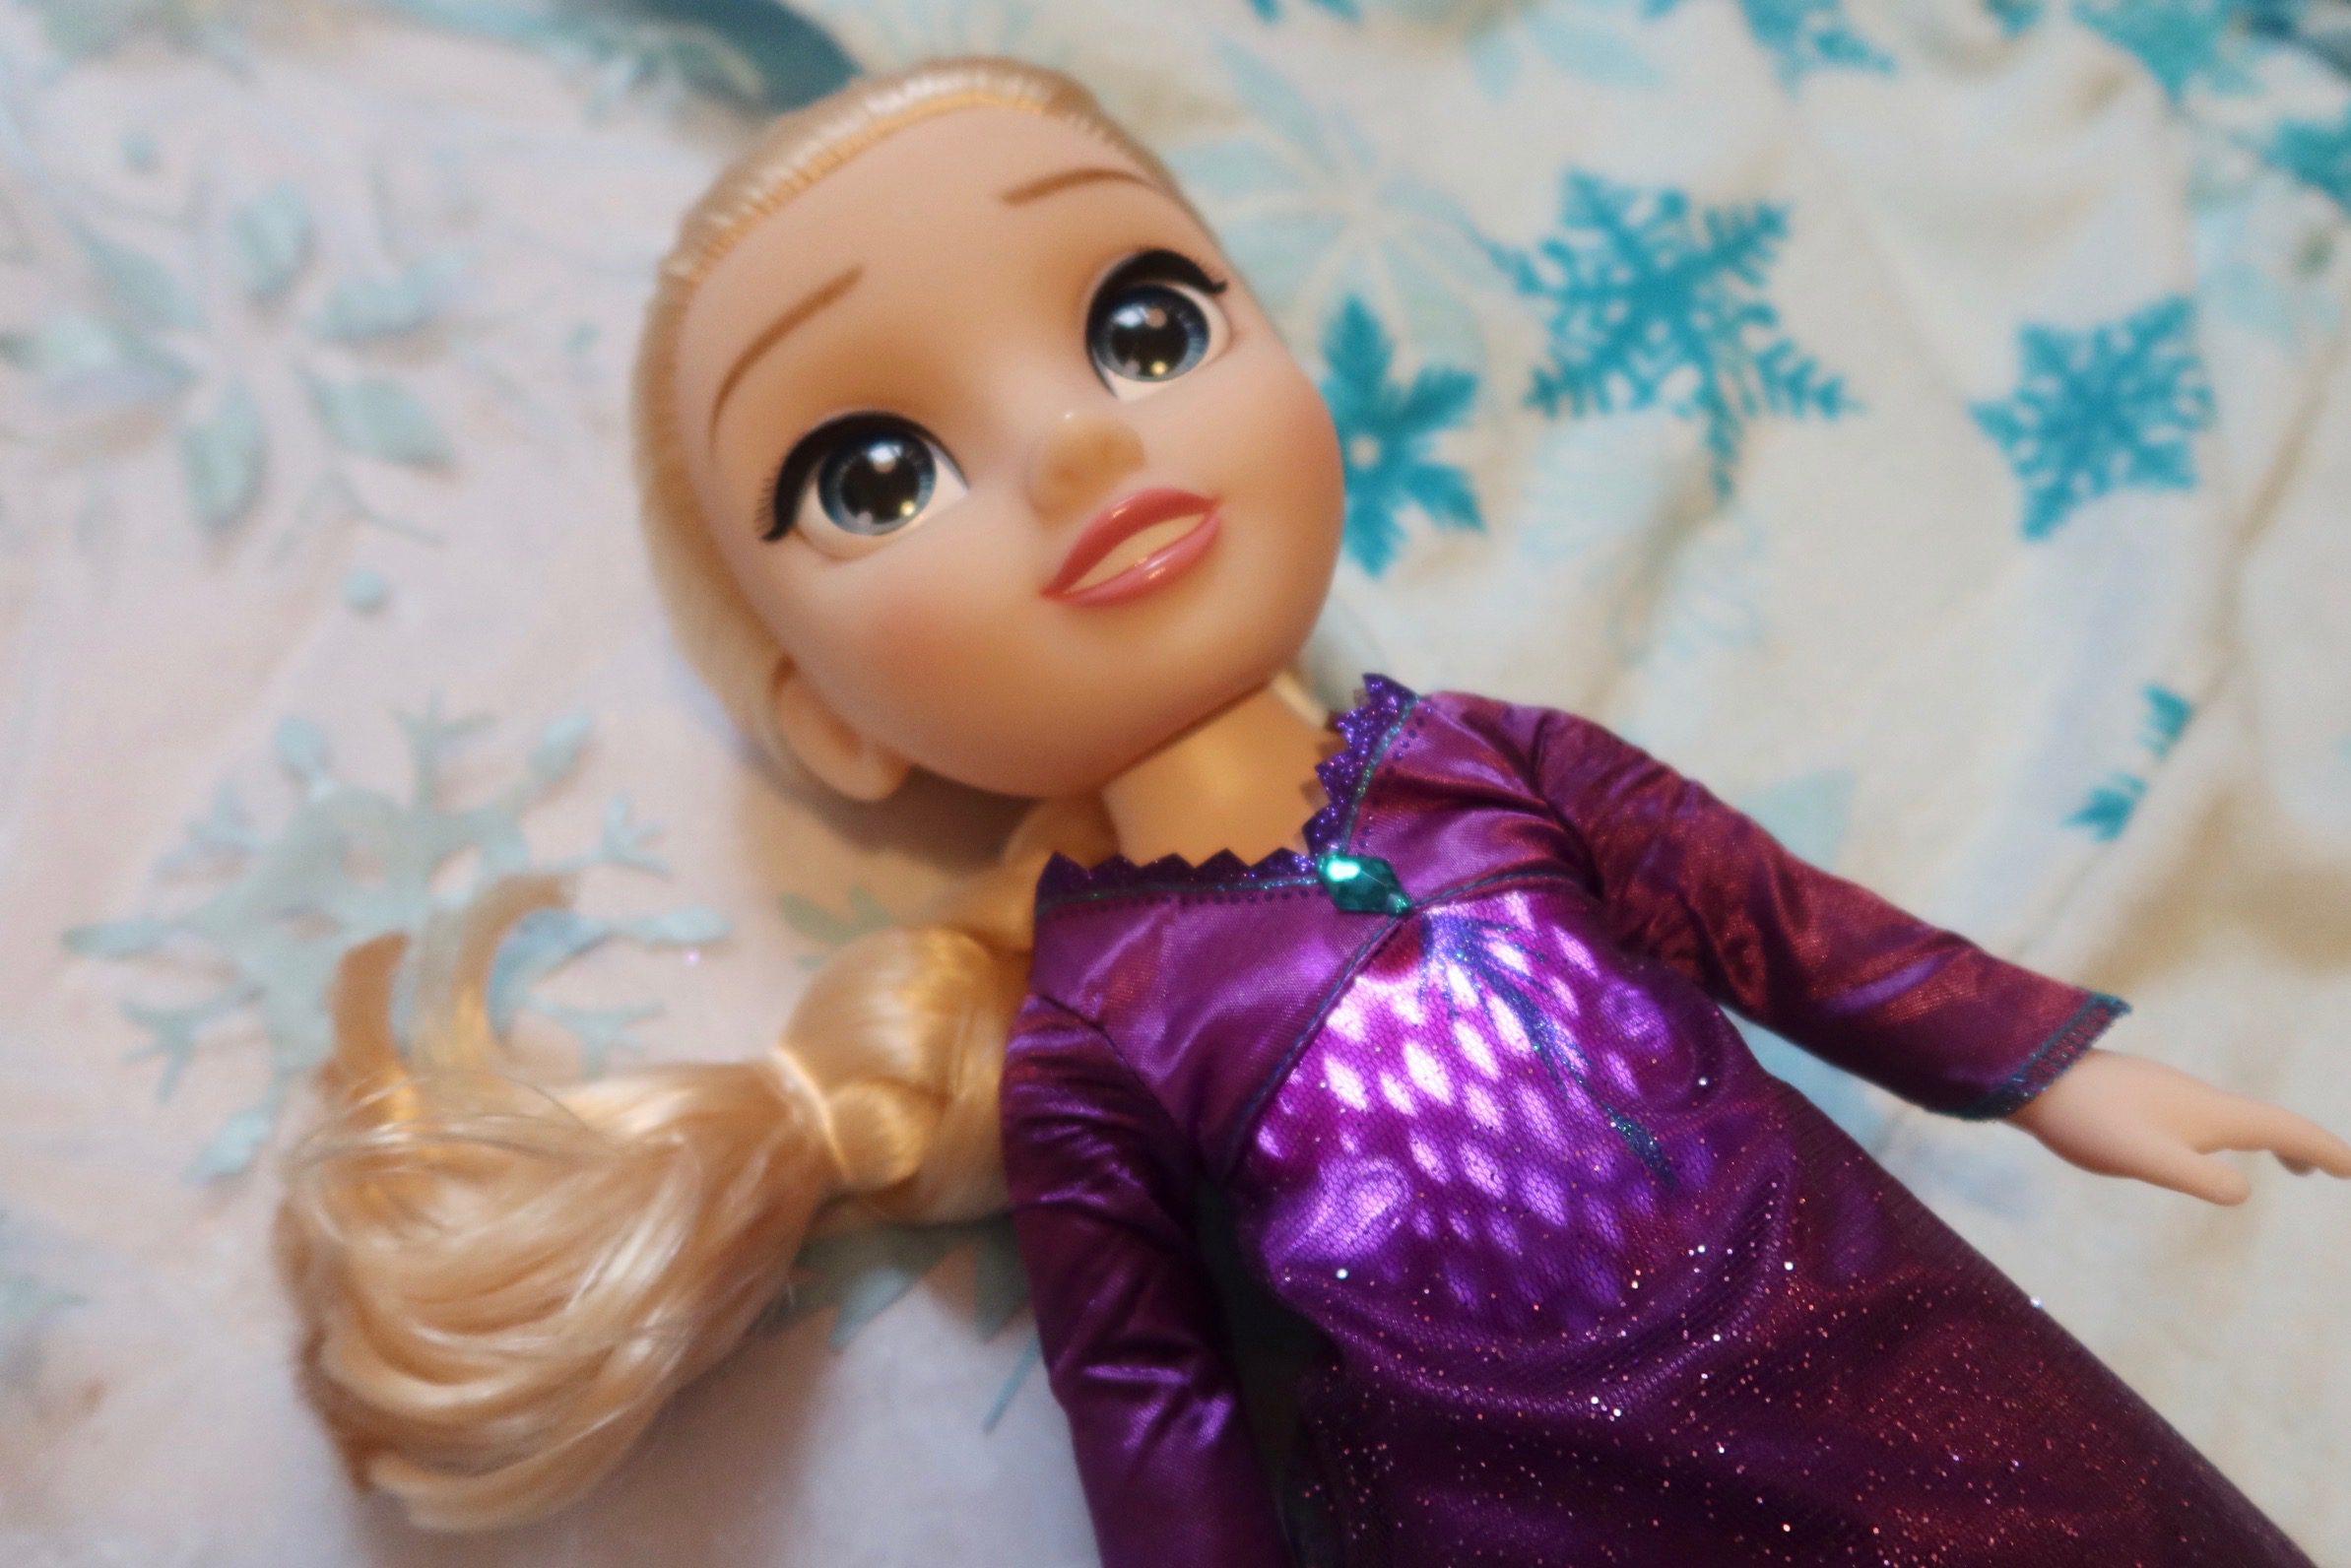 The Ultimate Frozen 2 Gifts & Toys Guide